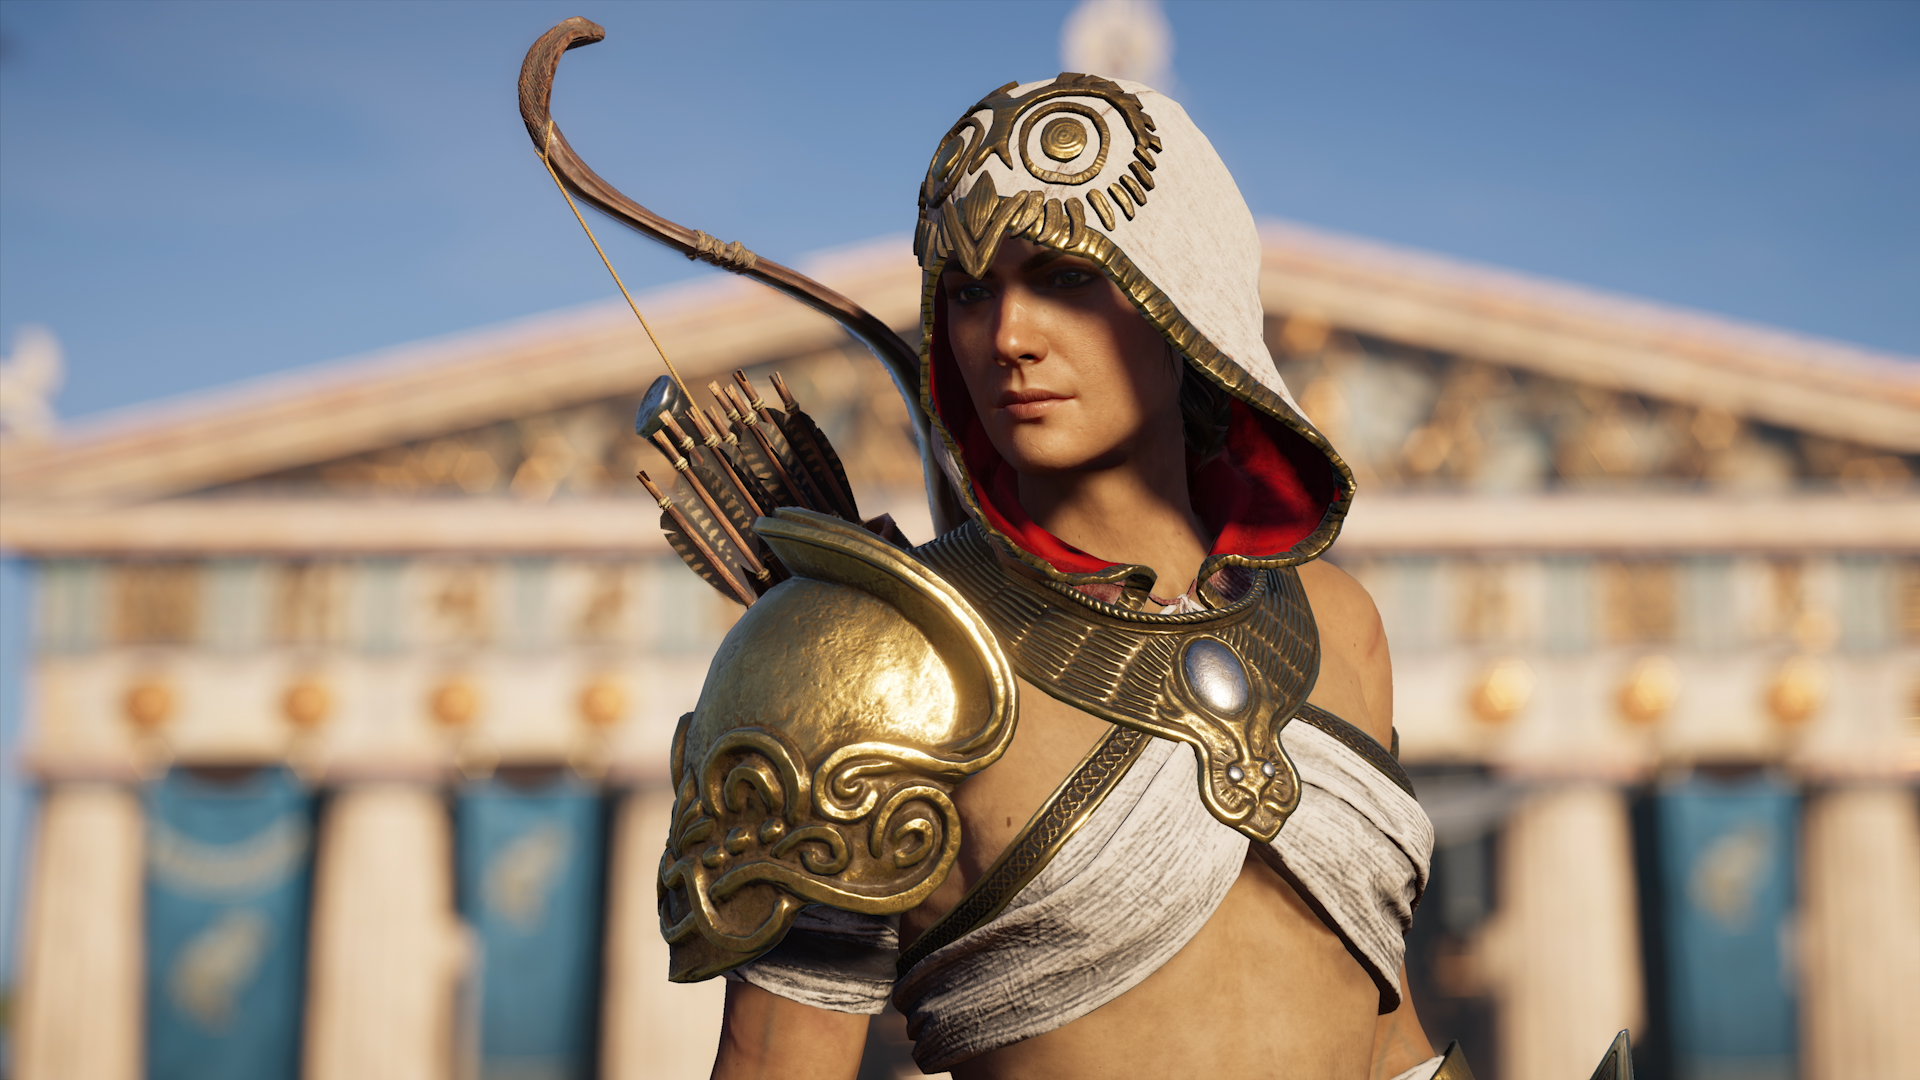 Assassin’s Creed Infinity brings back multiplayer and new game Hexe